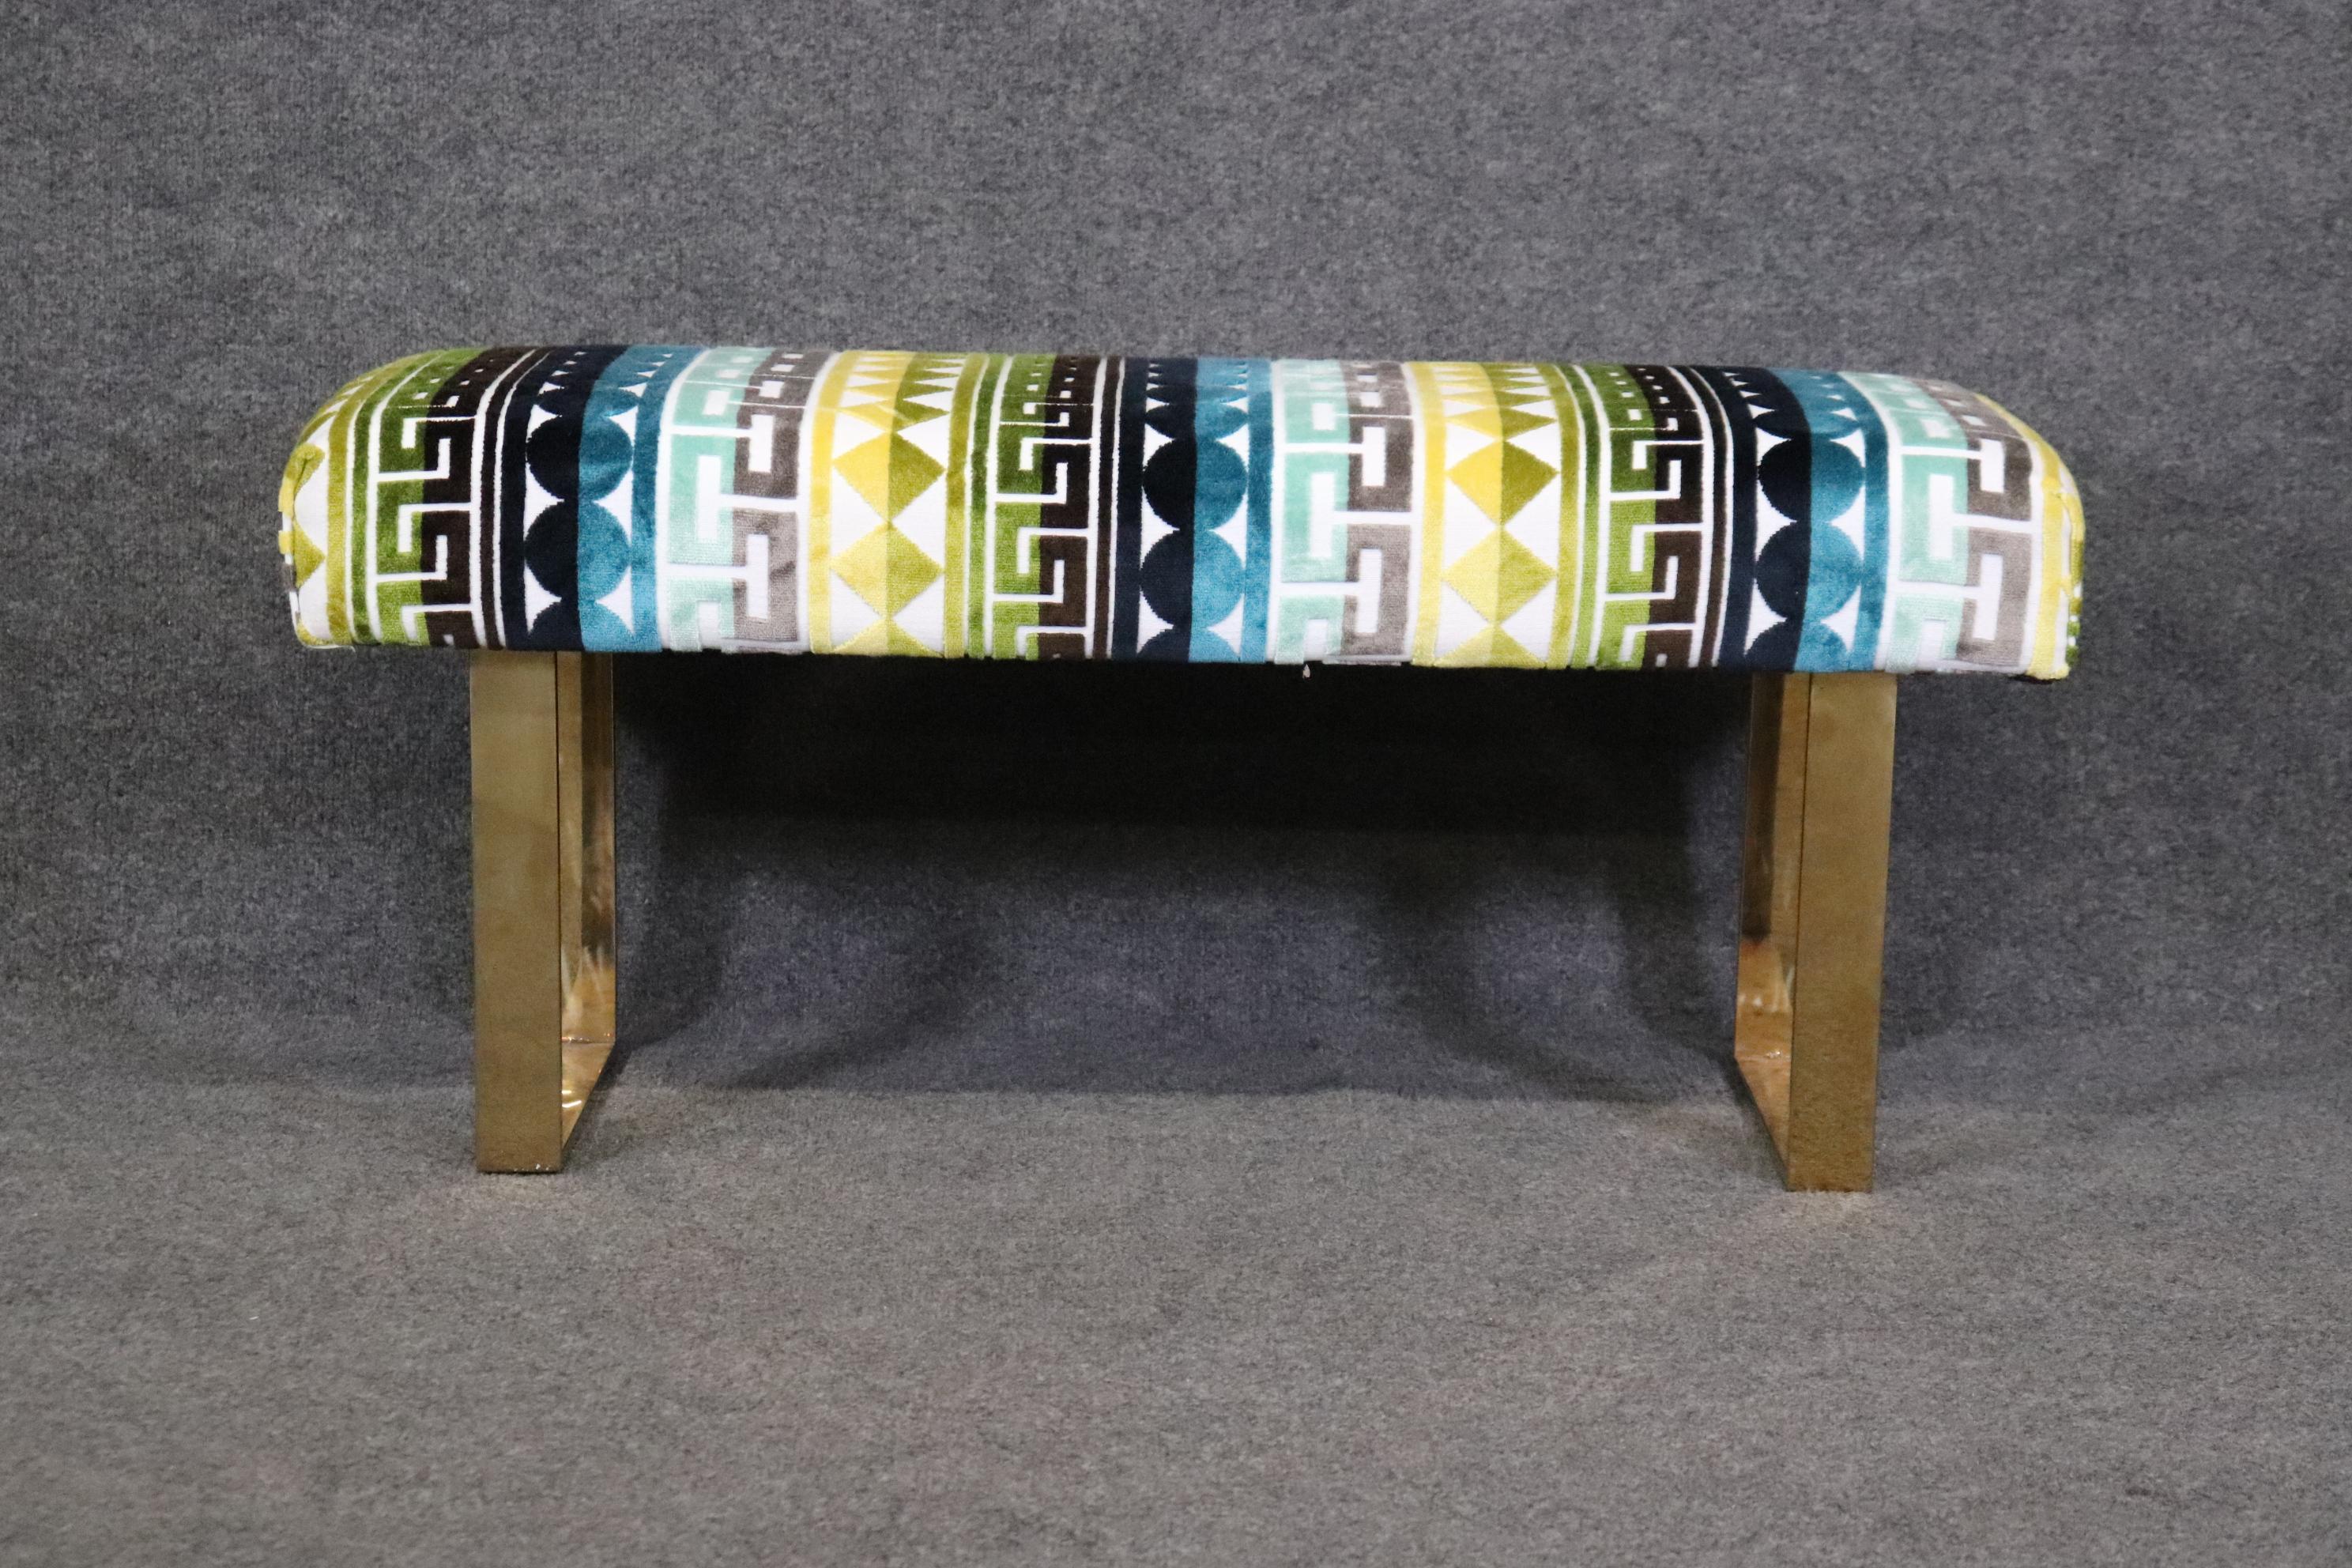 This is a gorgeous brass and abstract upholstered Milo Baughman style bench. The bench is newly upholstered in a bright and colorful abstract fabric and is in excellent overall condition. The bench measures 40.25 wide x 16.5 deep x 17.75 tall and